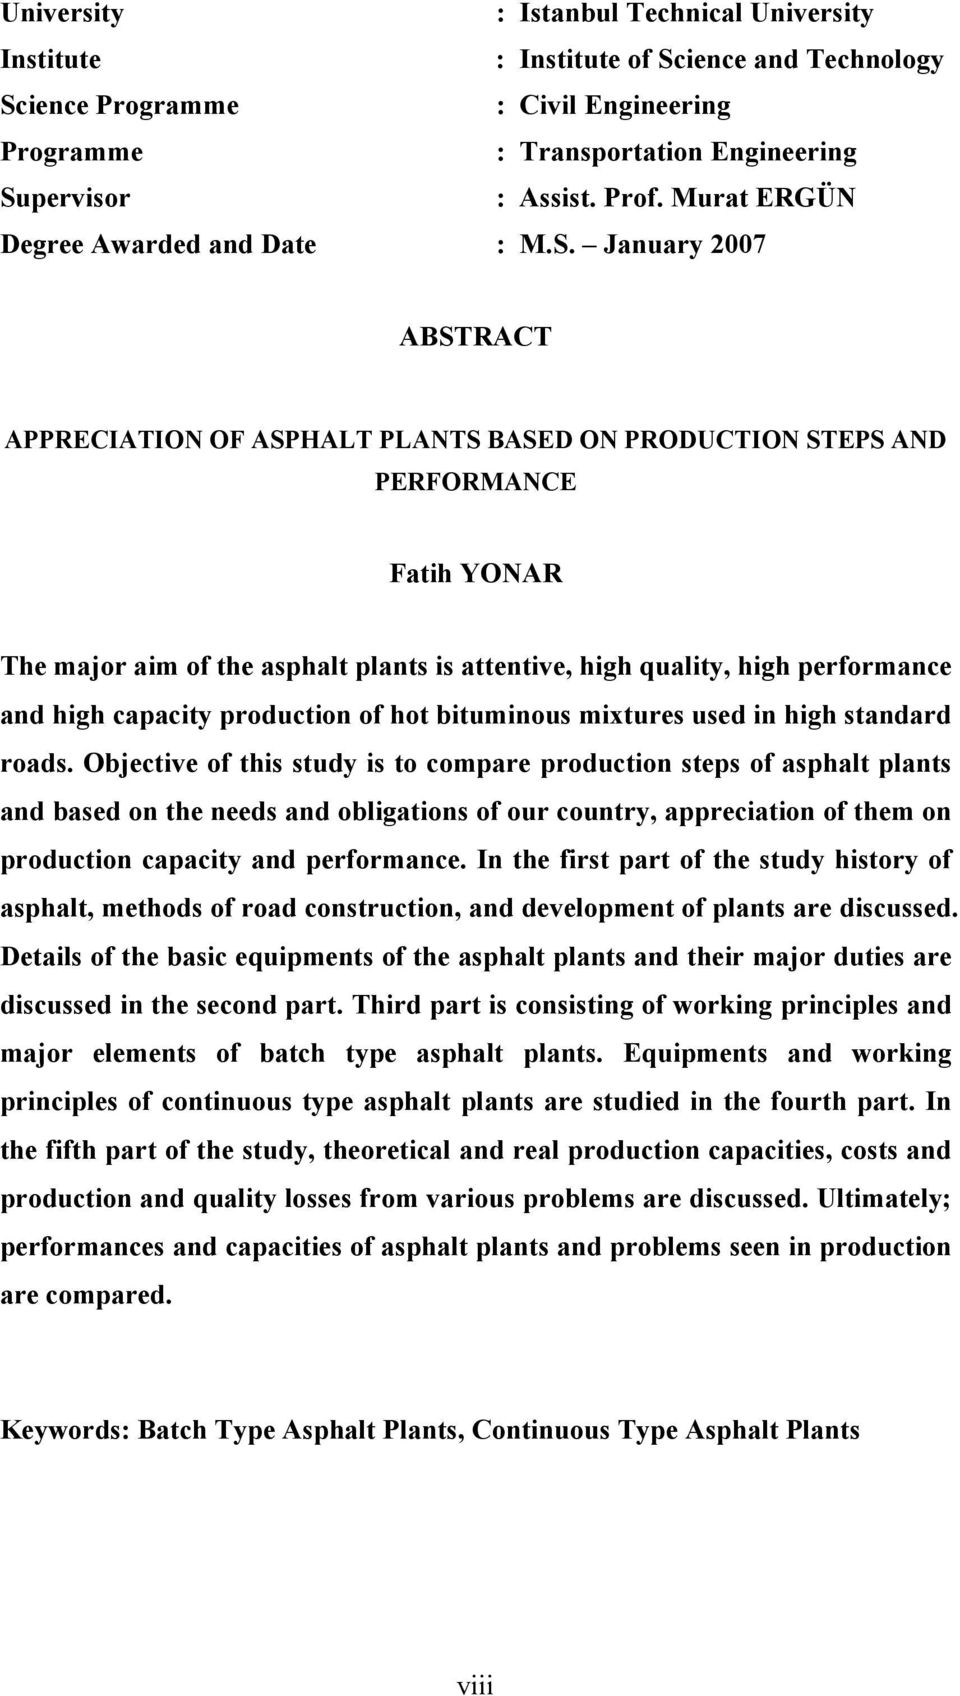 January 2007 ABSTRACT APPRECIATION OF ASPHALT PLANTS BASED ON PRODUCTION STEPS AND PERFORMANCE Fatih YONAR The major aim of the asphalt plants is attentive, high quality, high performance and high